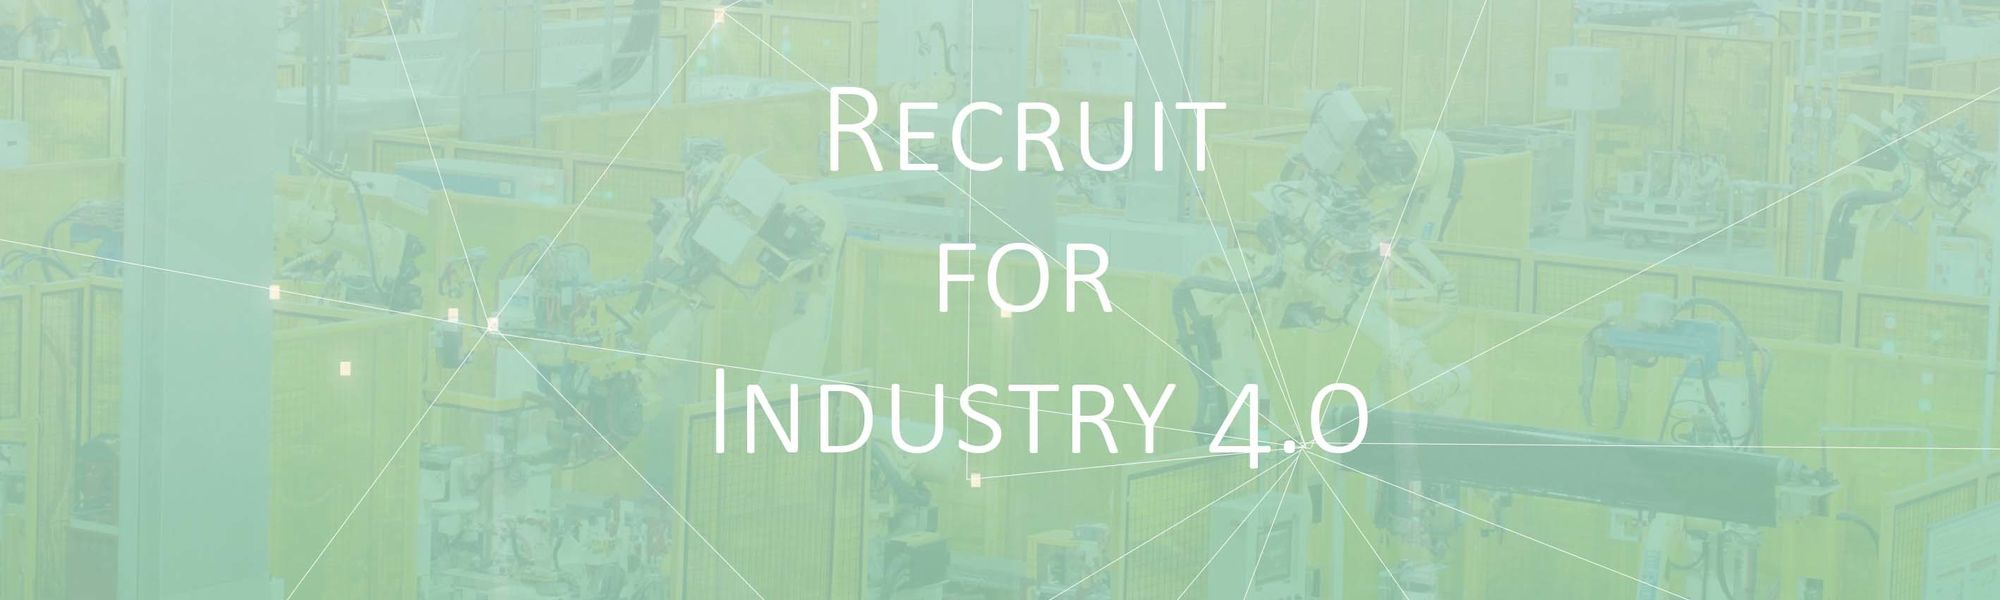 Recruit For Industry 4